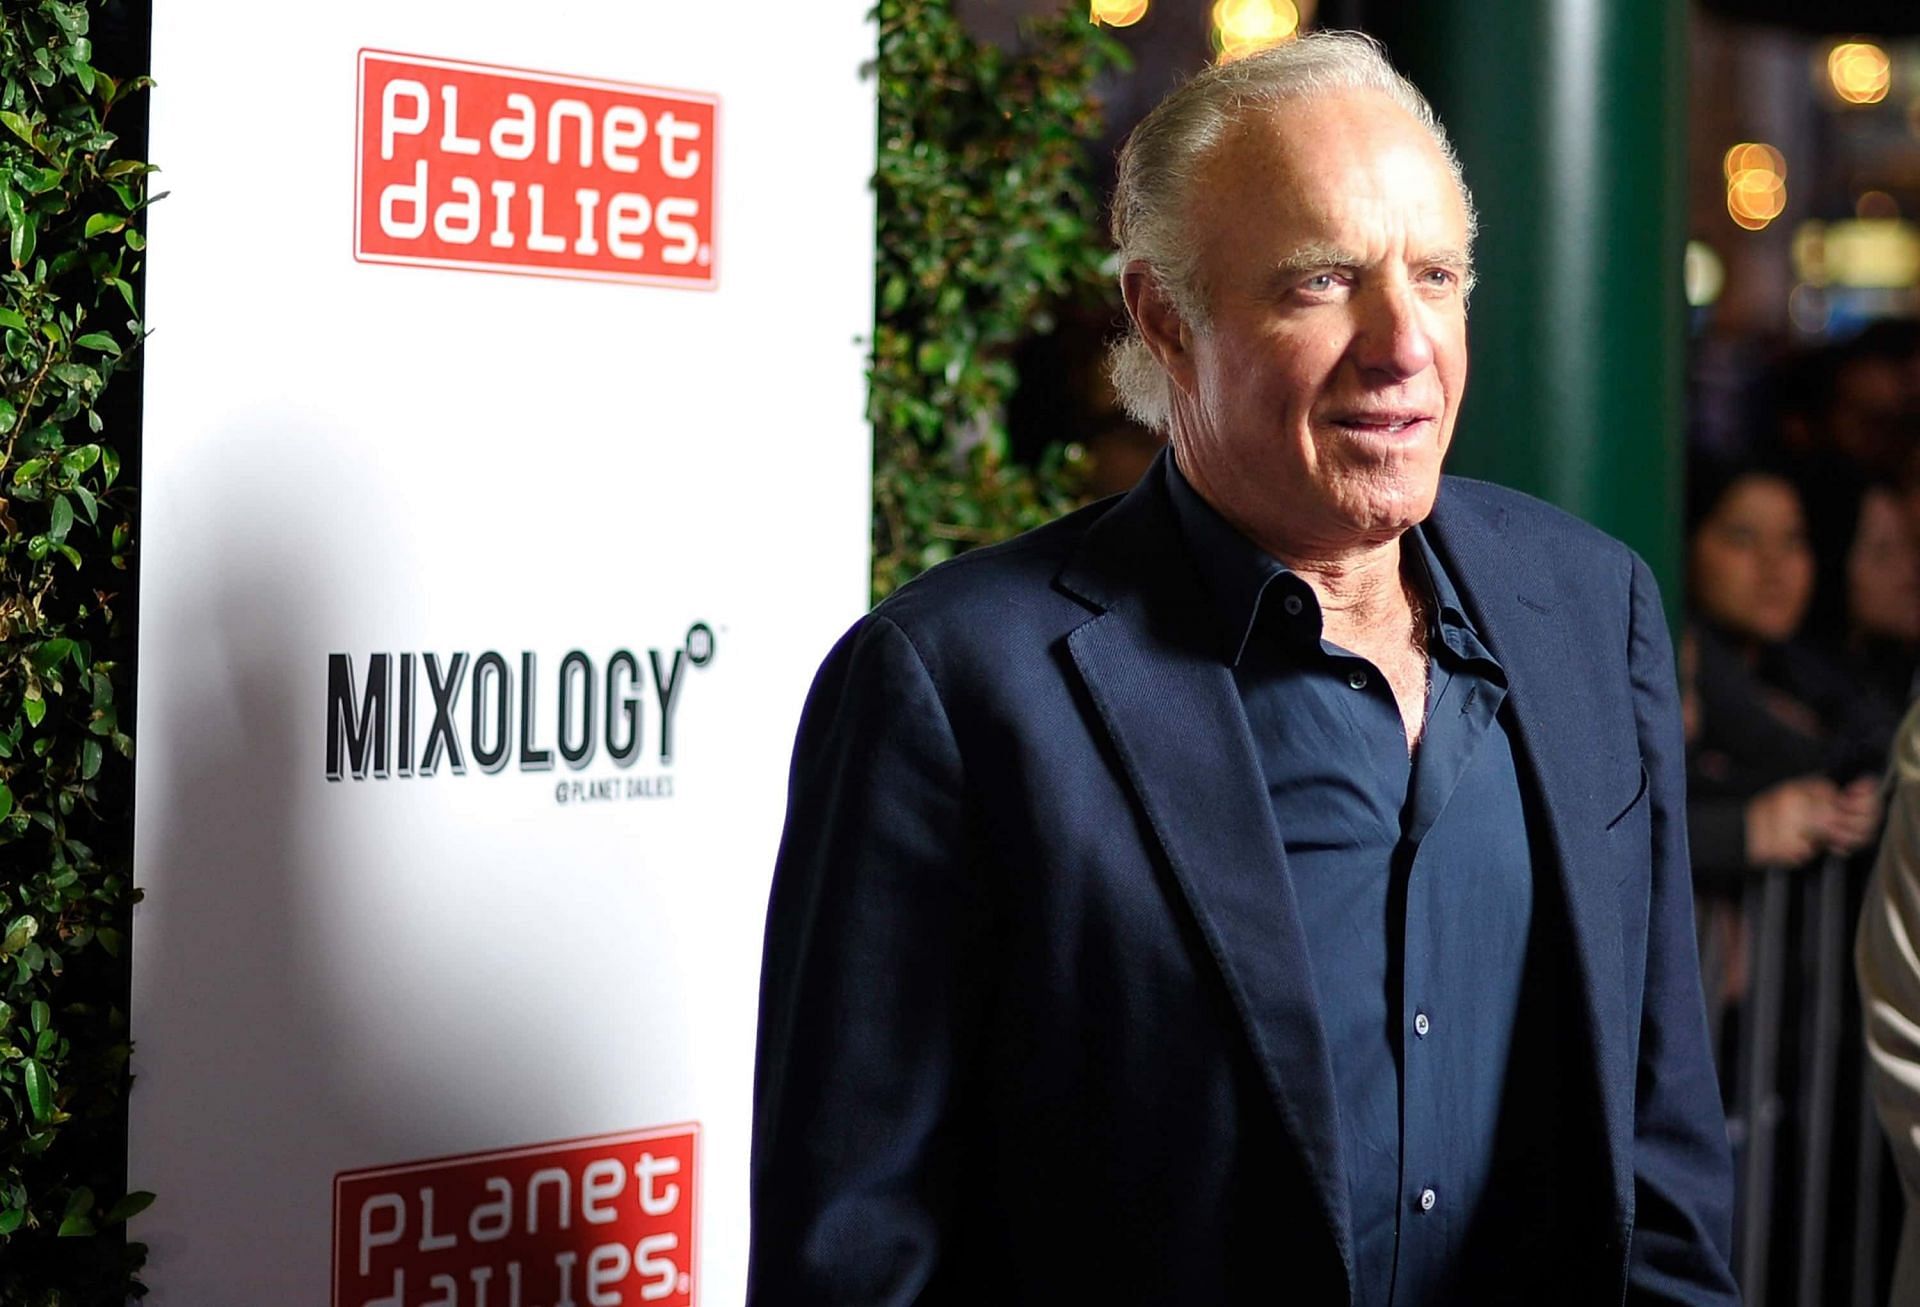 James Caan at the red carpet in 2012 (Image via Jerod Harris/Getty Images)